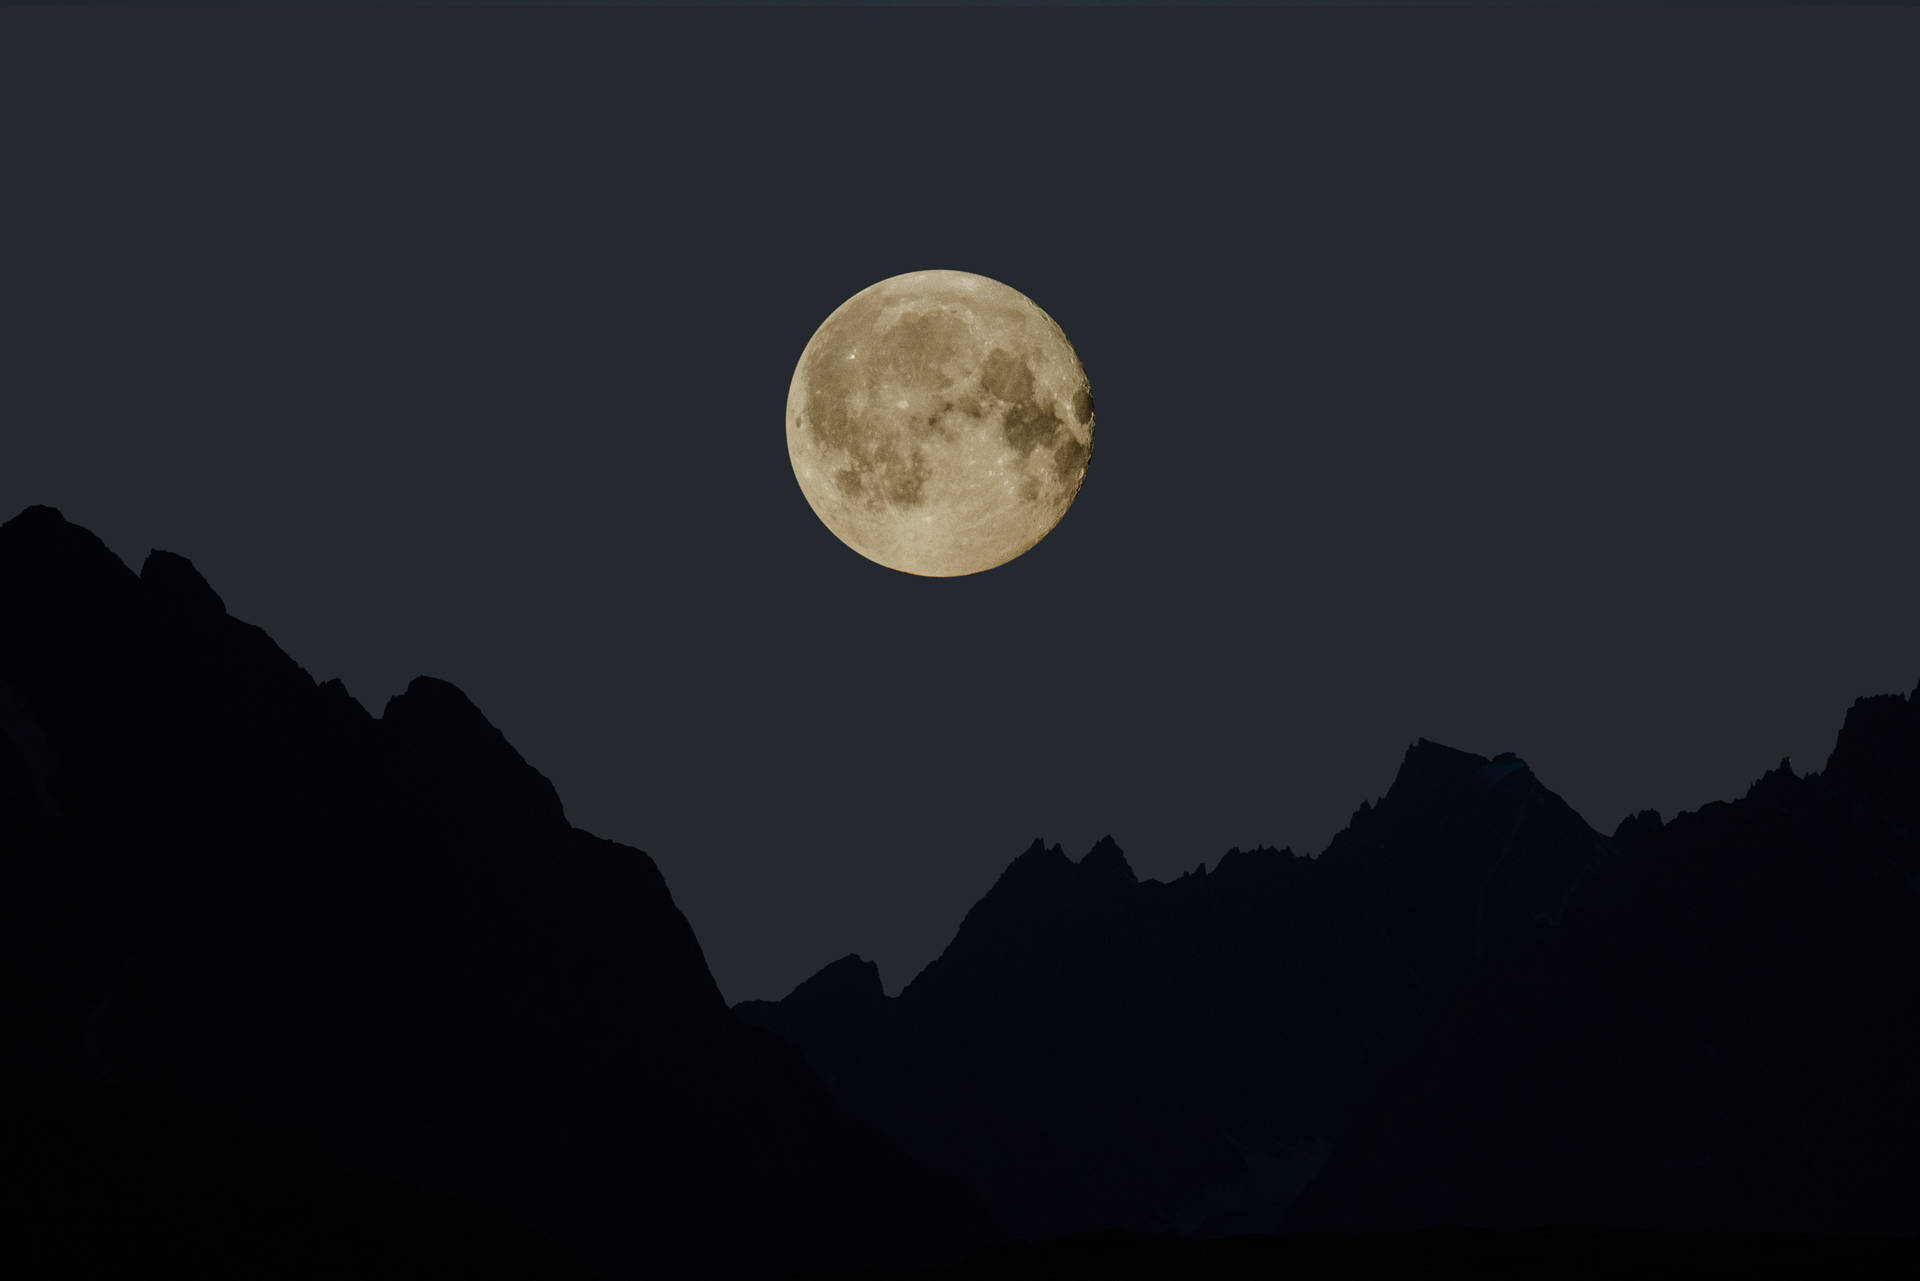 Aesthetic wallpaper of yellow full moon and mountain silhouette. 